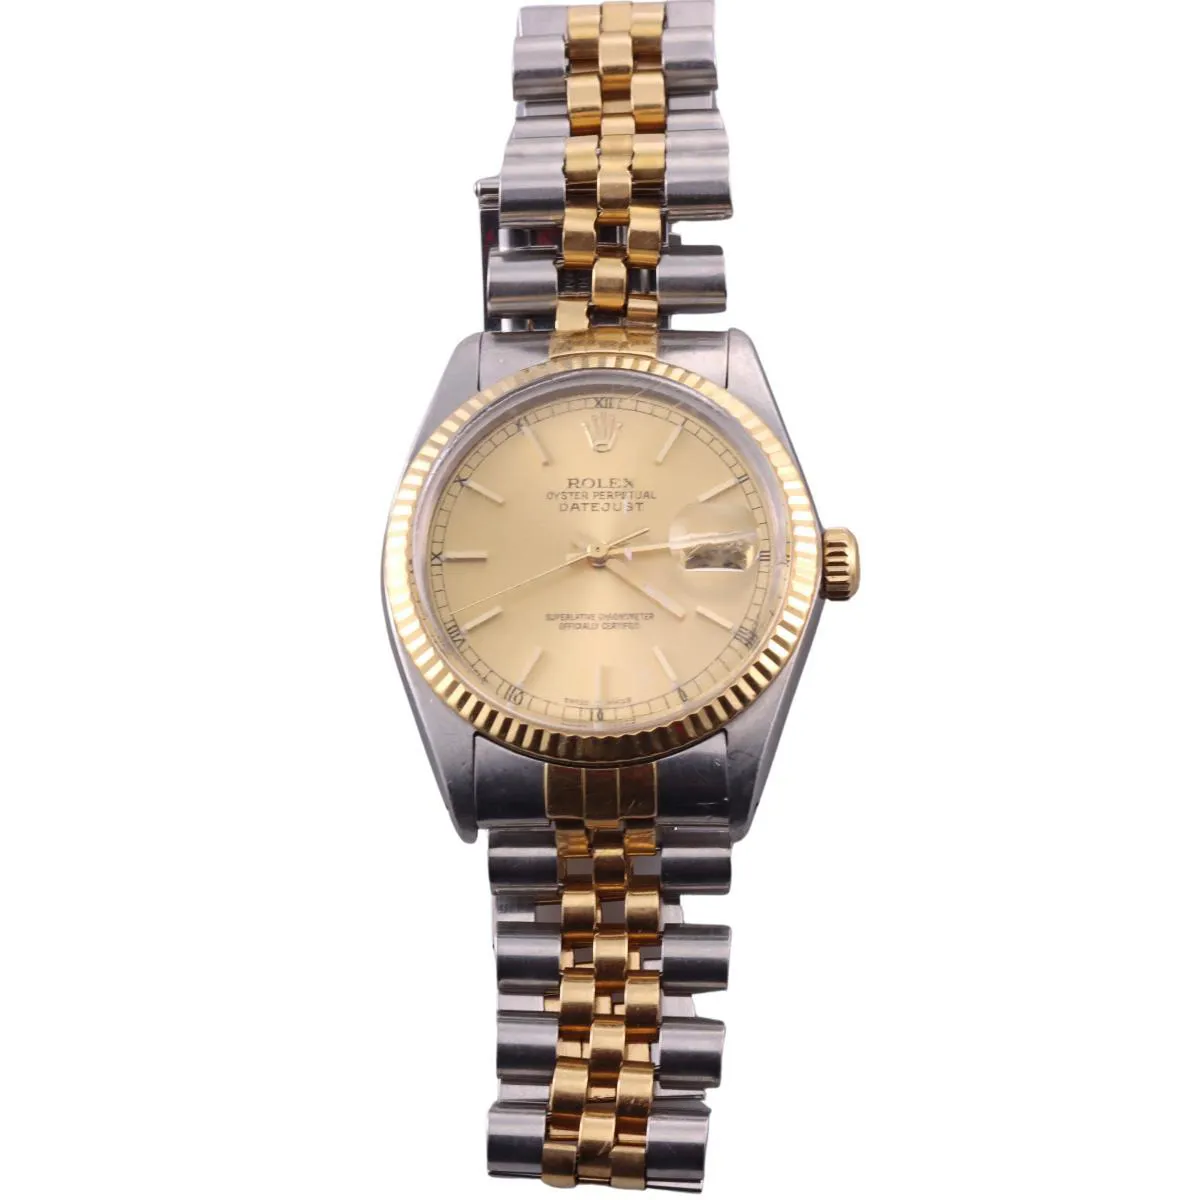 Rolex Datejust 36 16013 36mm Yellow gold and stainless steel